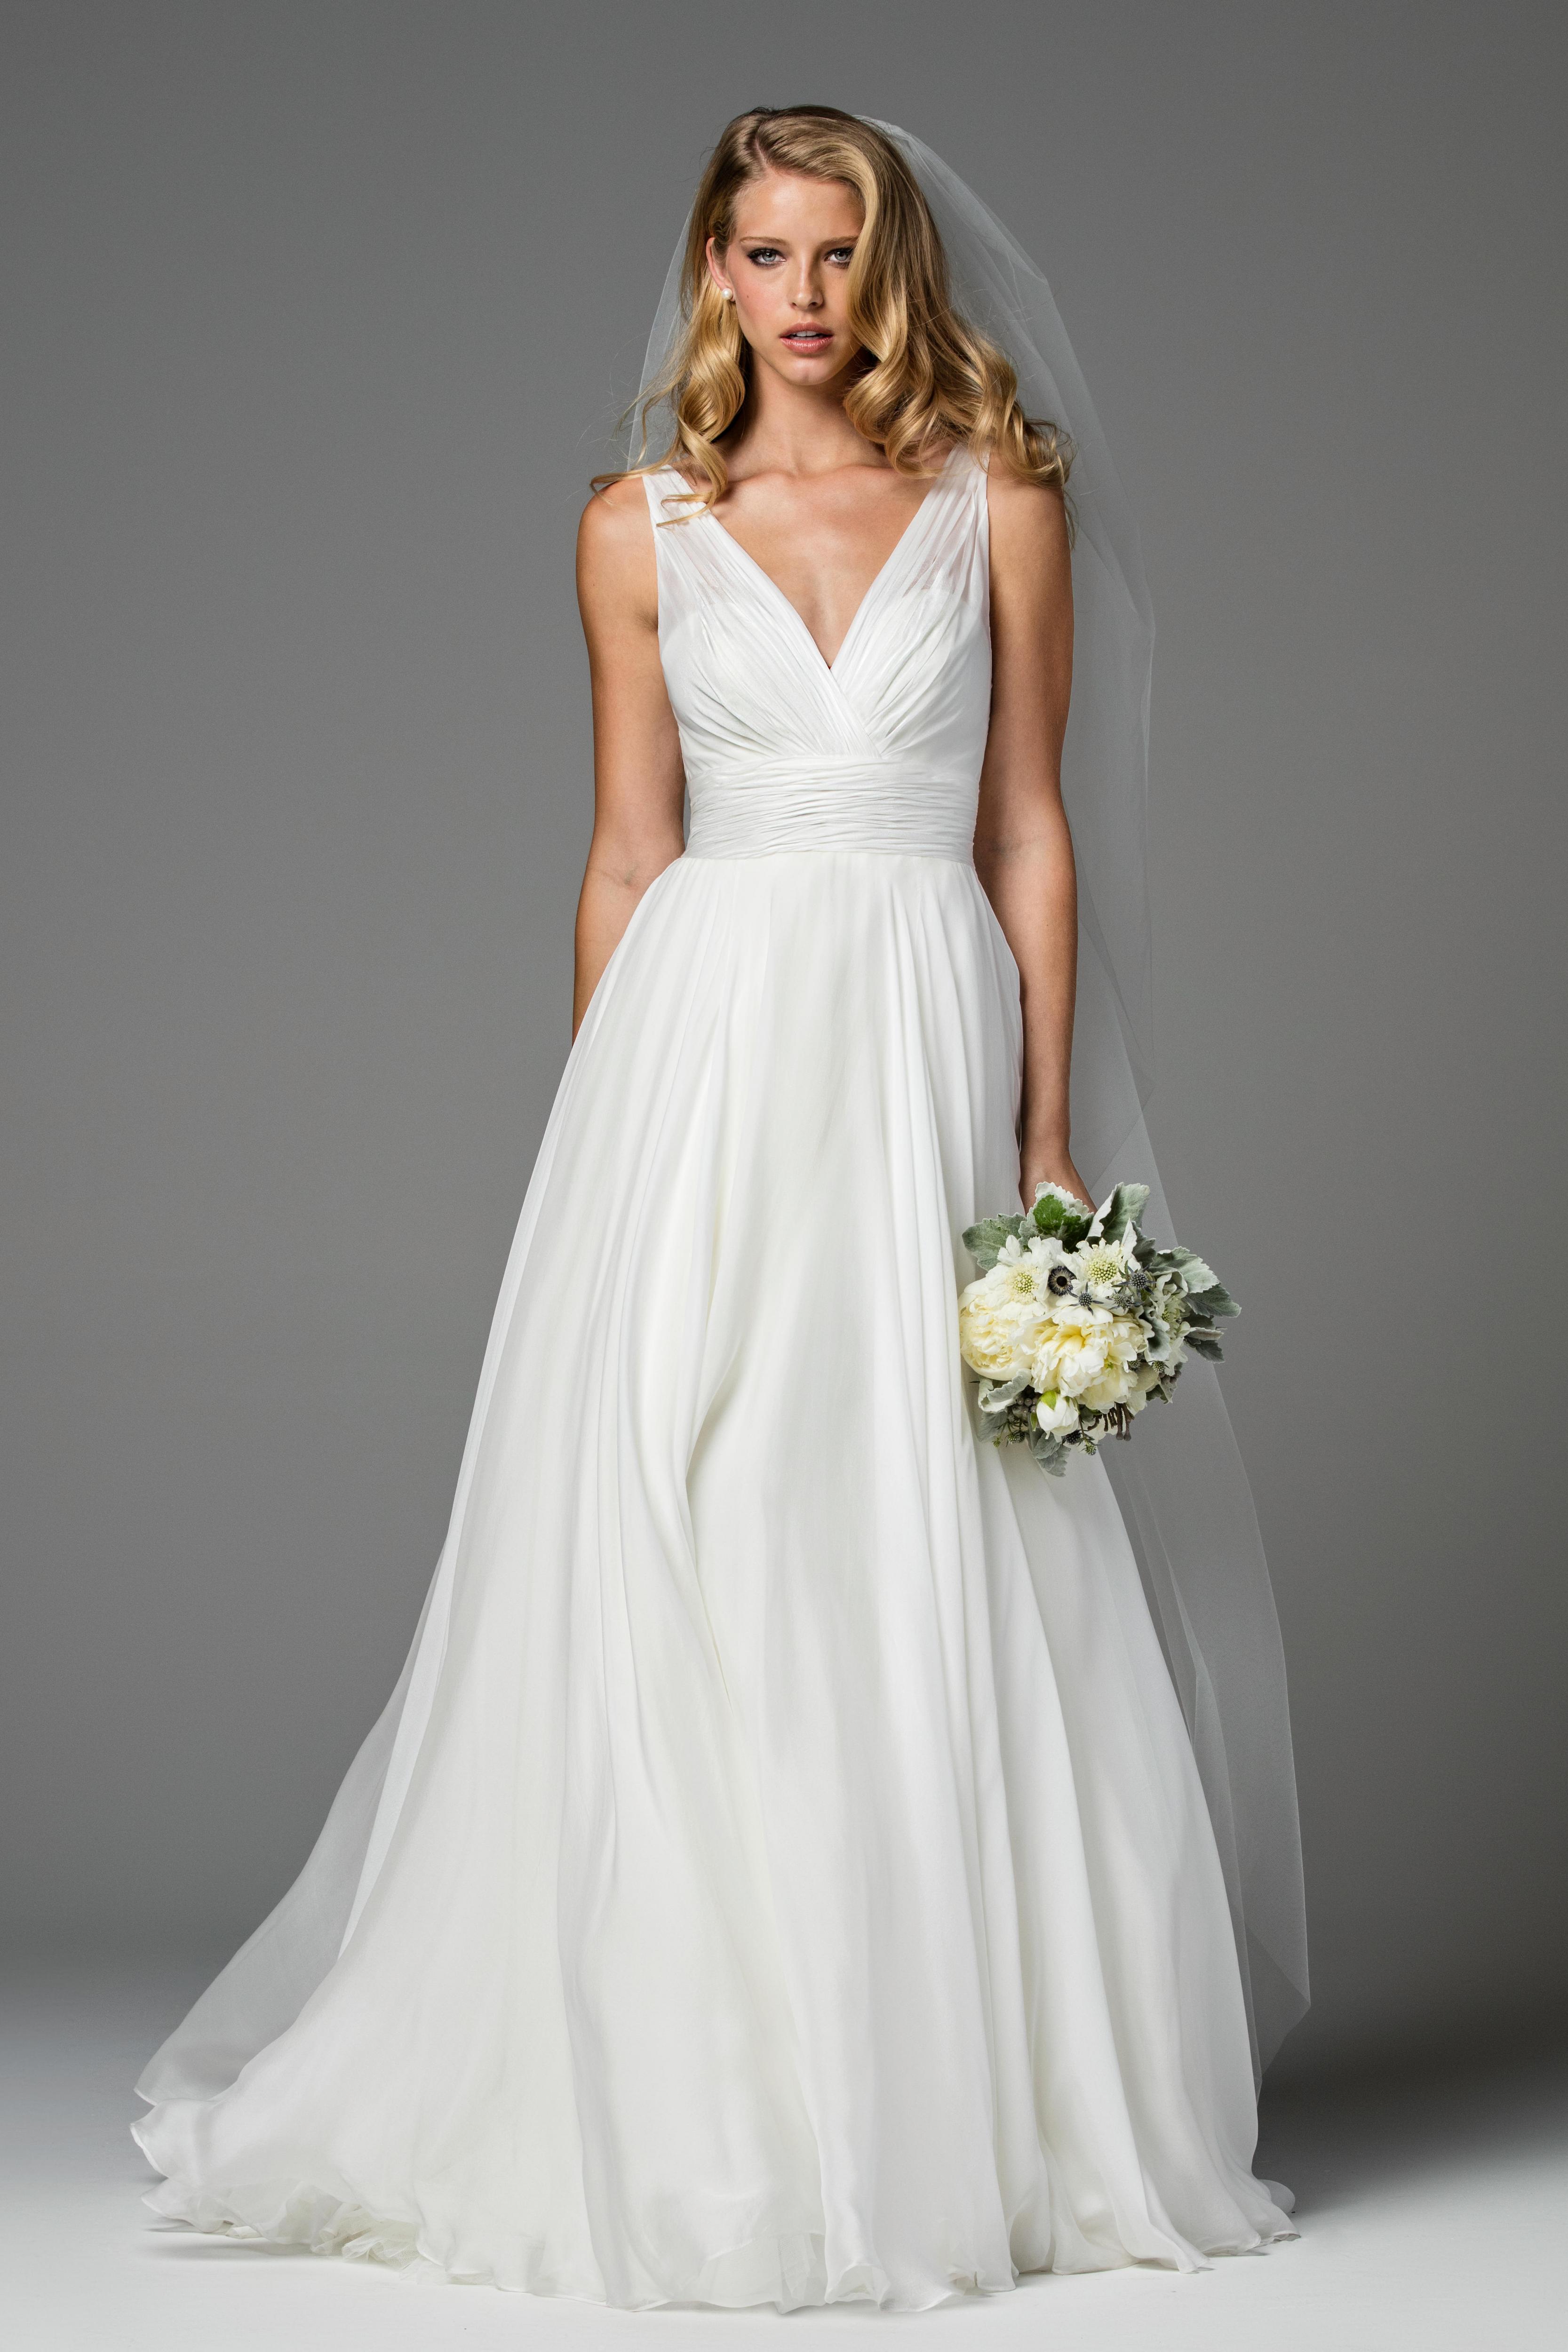 Top Watters Wedding Dress in the world Don t miss out 